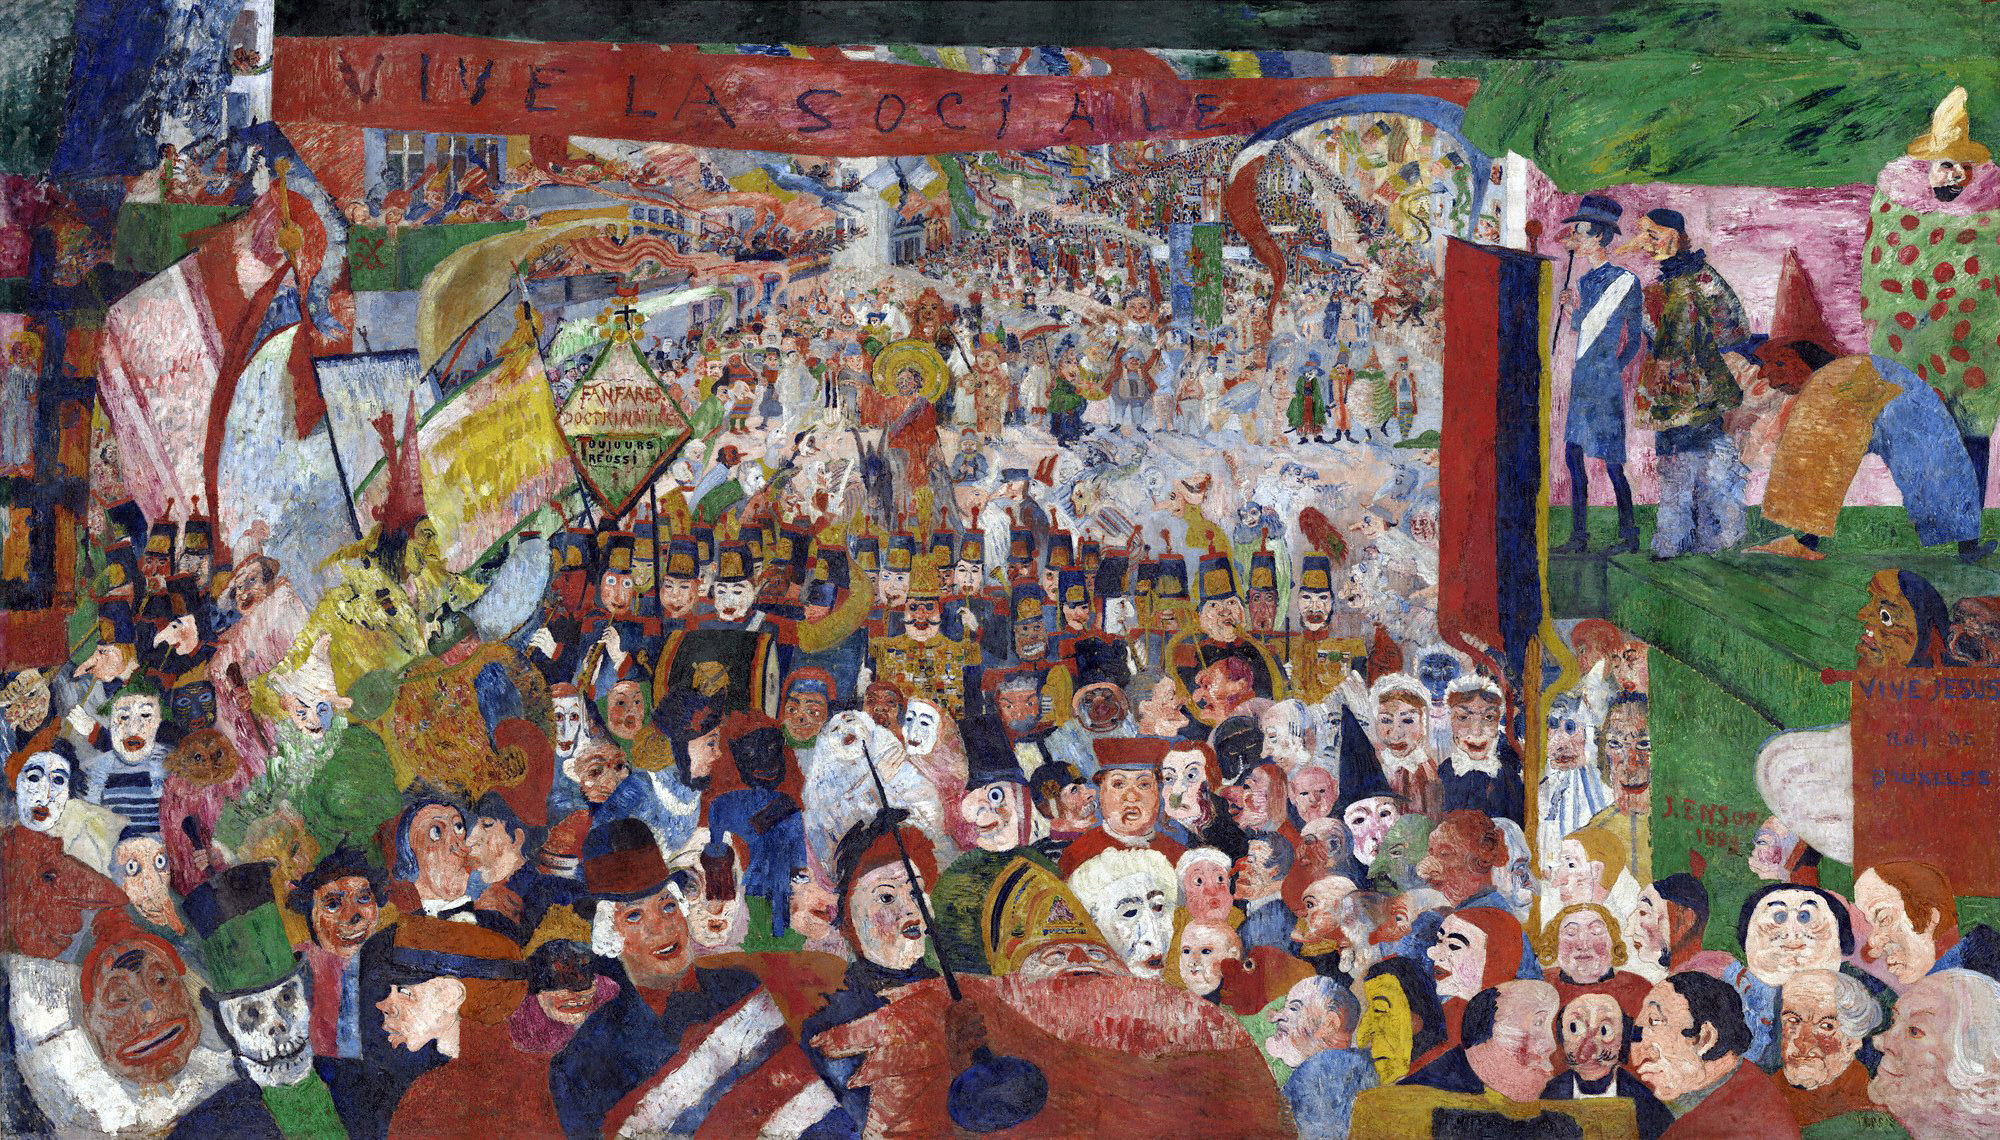 Christ's Entry Into Brussels in 1889 by James Ensor - 1888 - 252,5 x 430,5 cm J. Paul Getty Museum